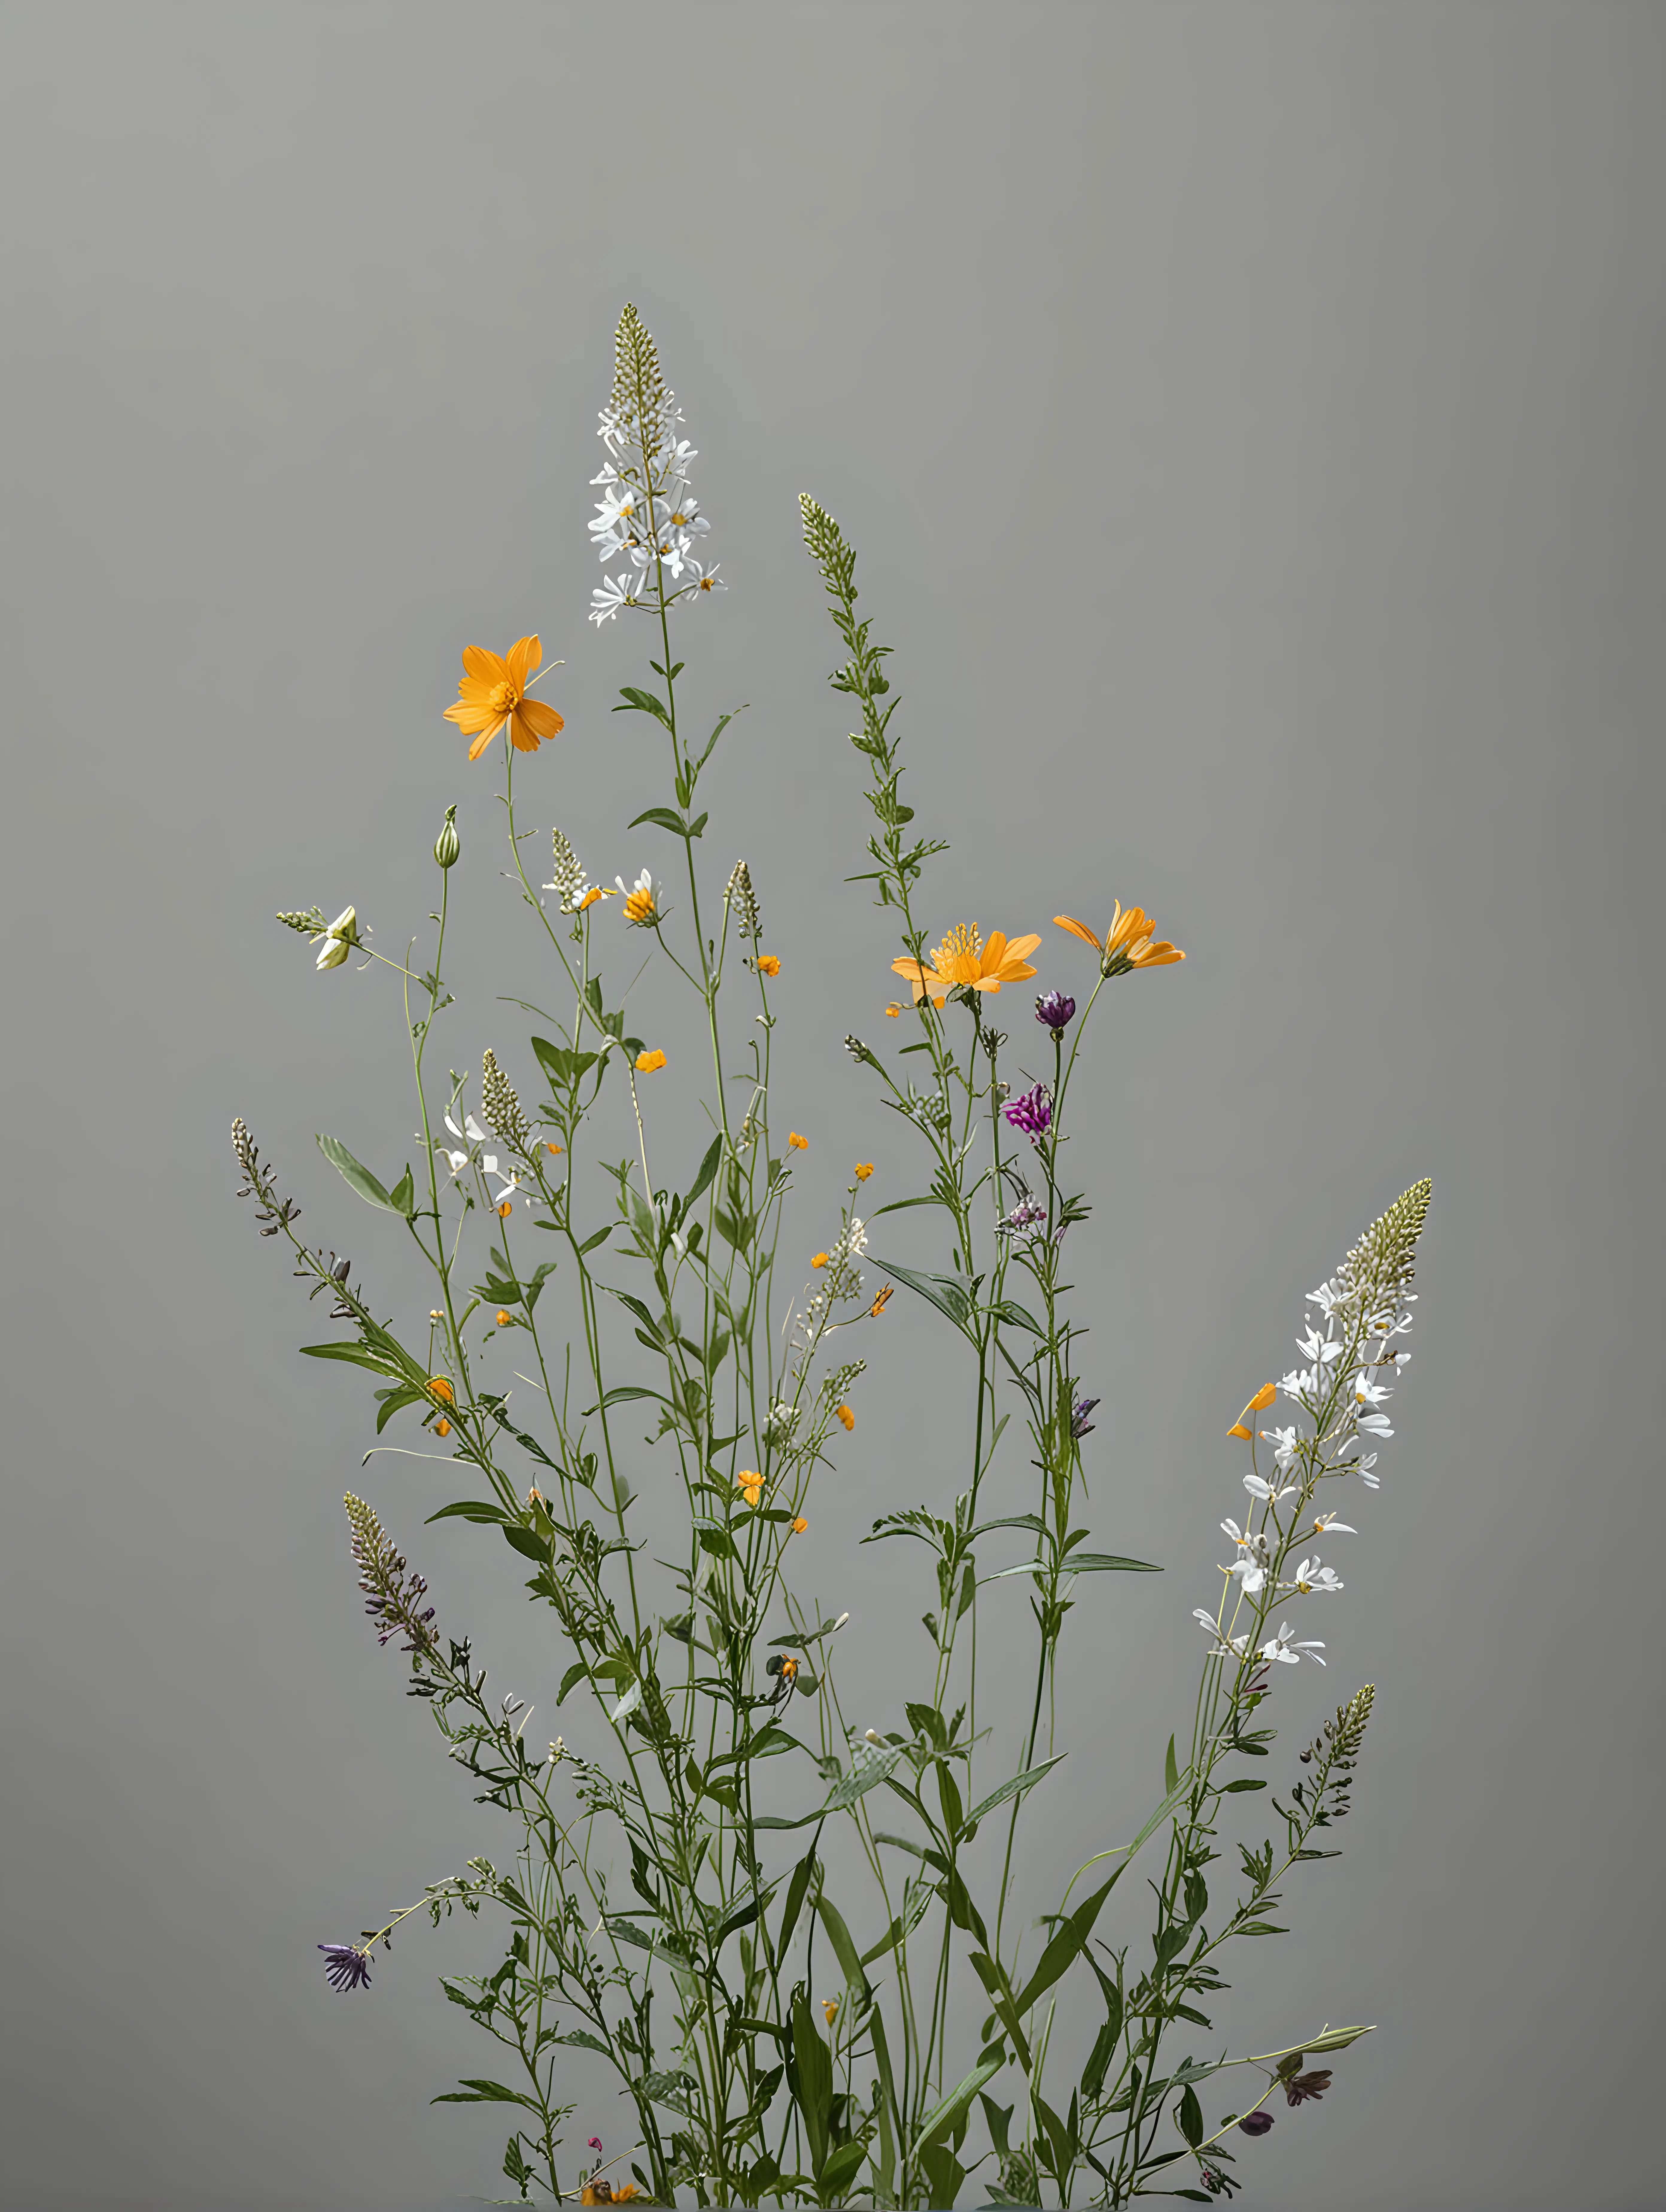 wildflowers growing in front of a neutral gray background.